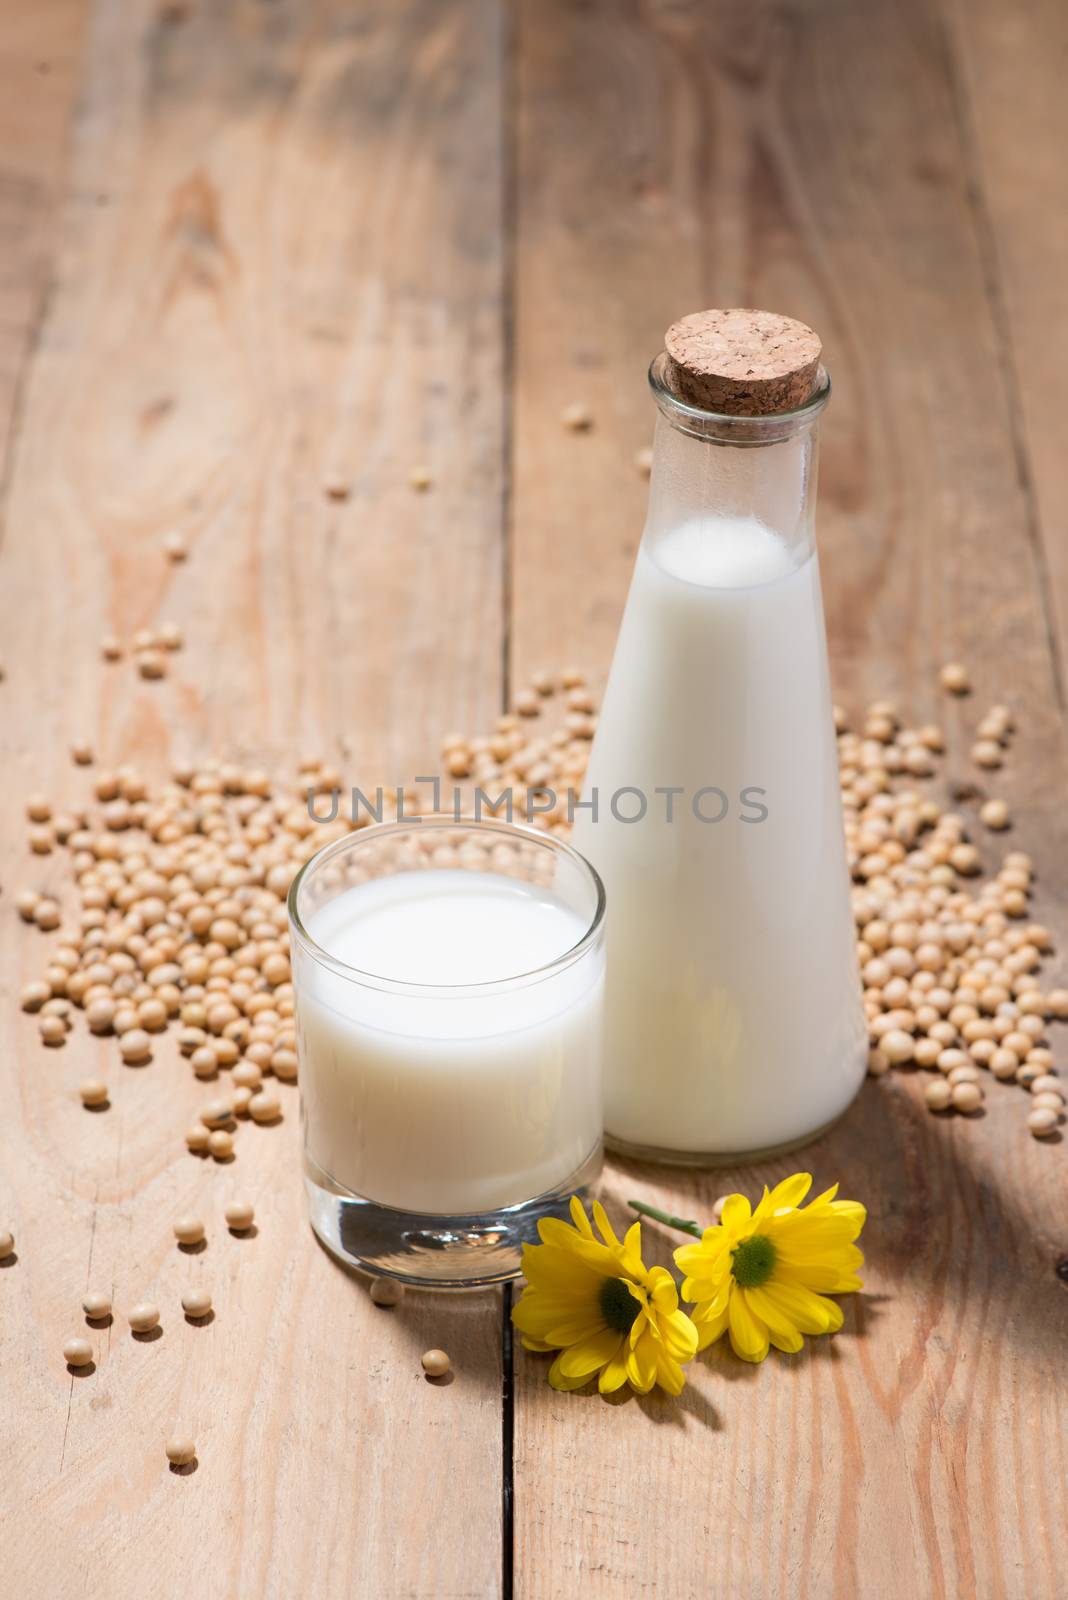 Soy milk or soya milk and soy beans in spoon on wooden table.  by makidotvn